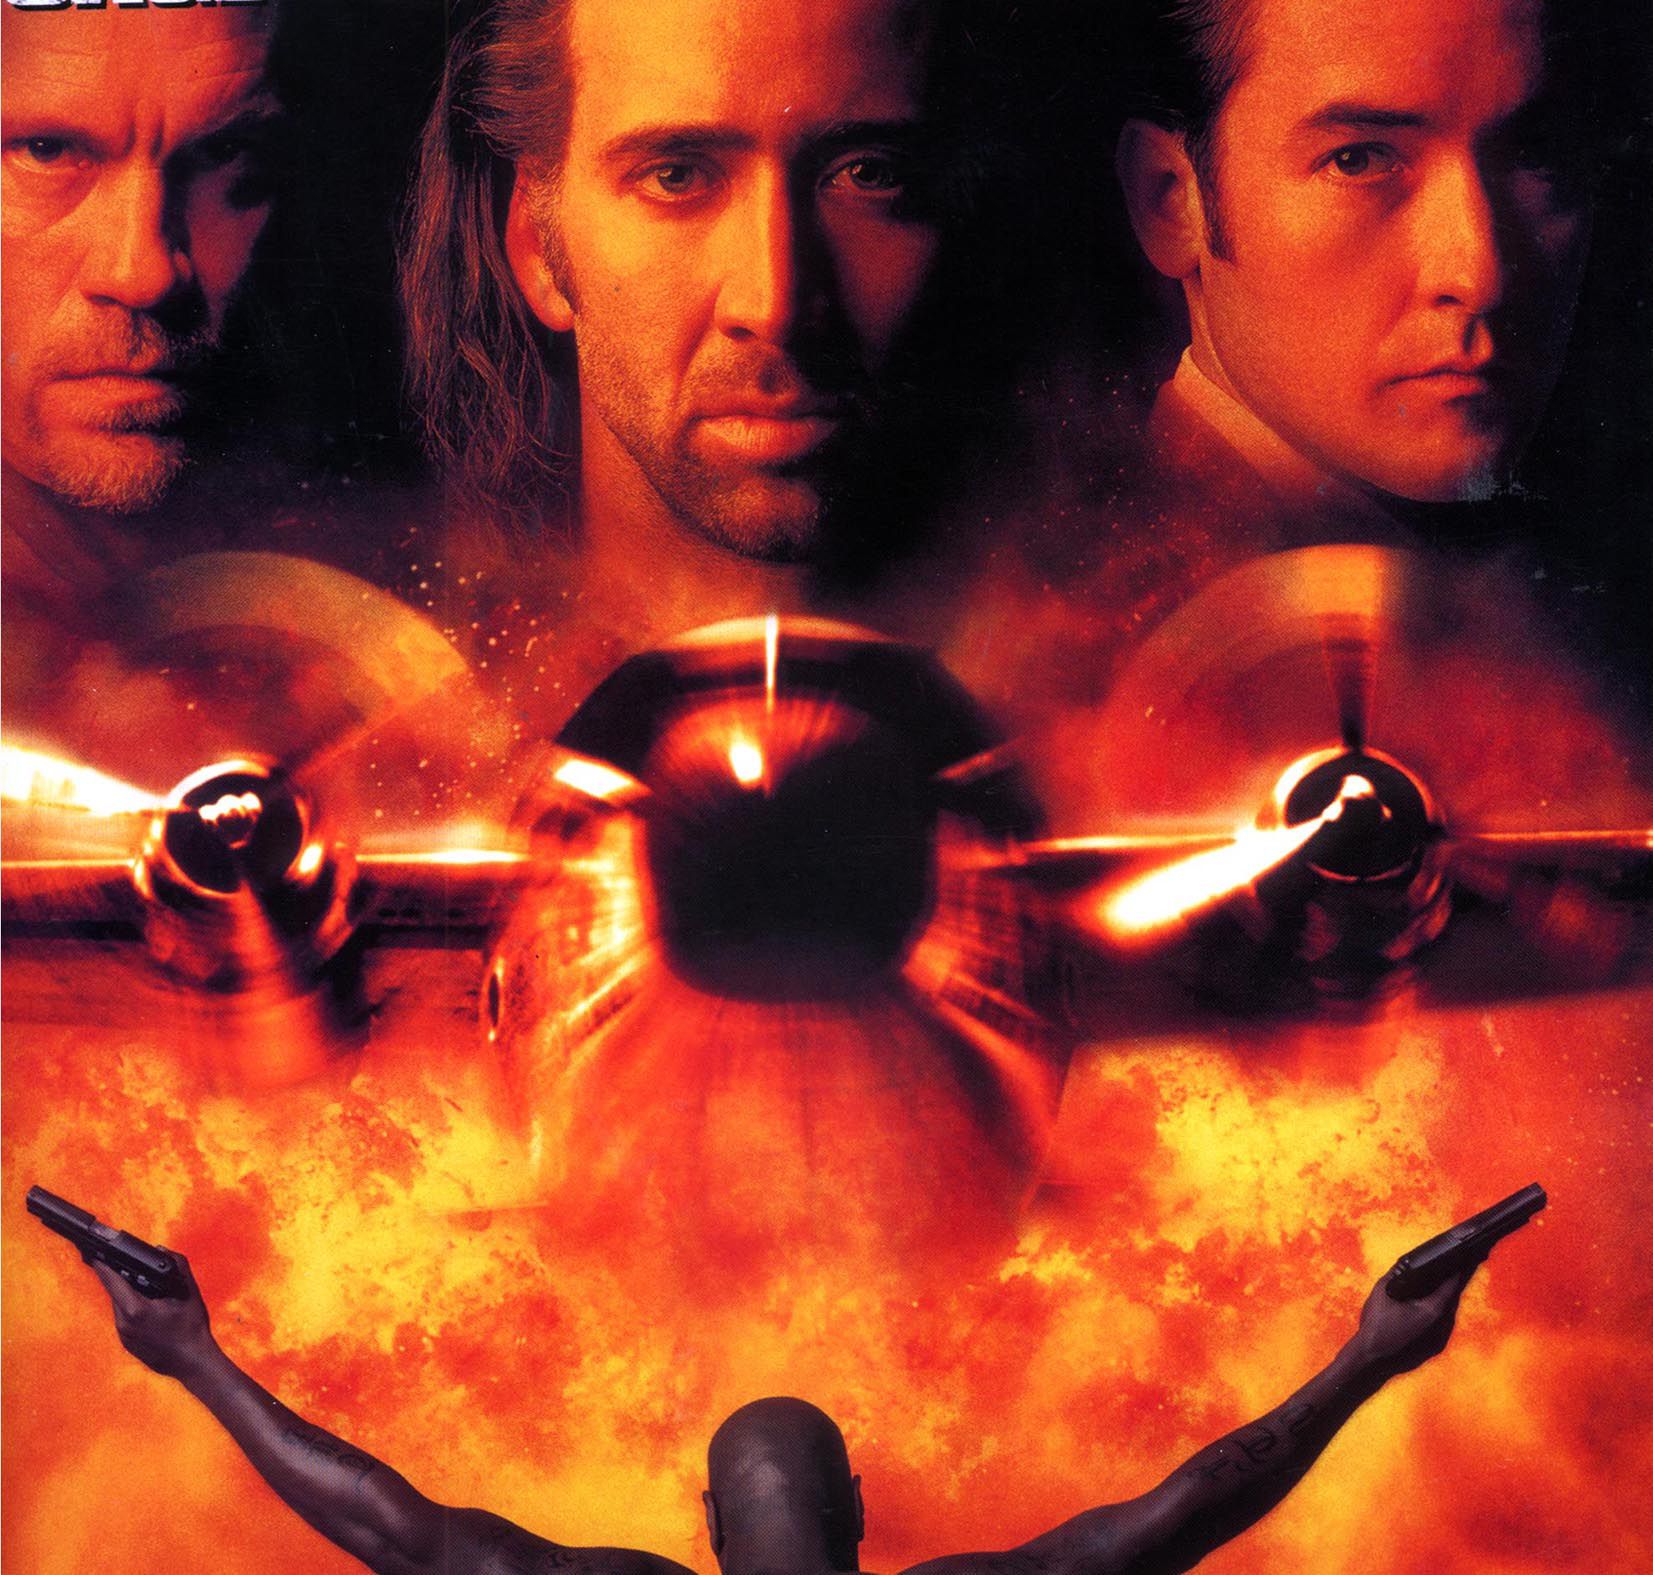 20 facts you might not know about 'Con Air